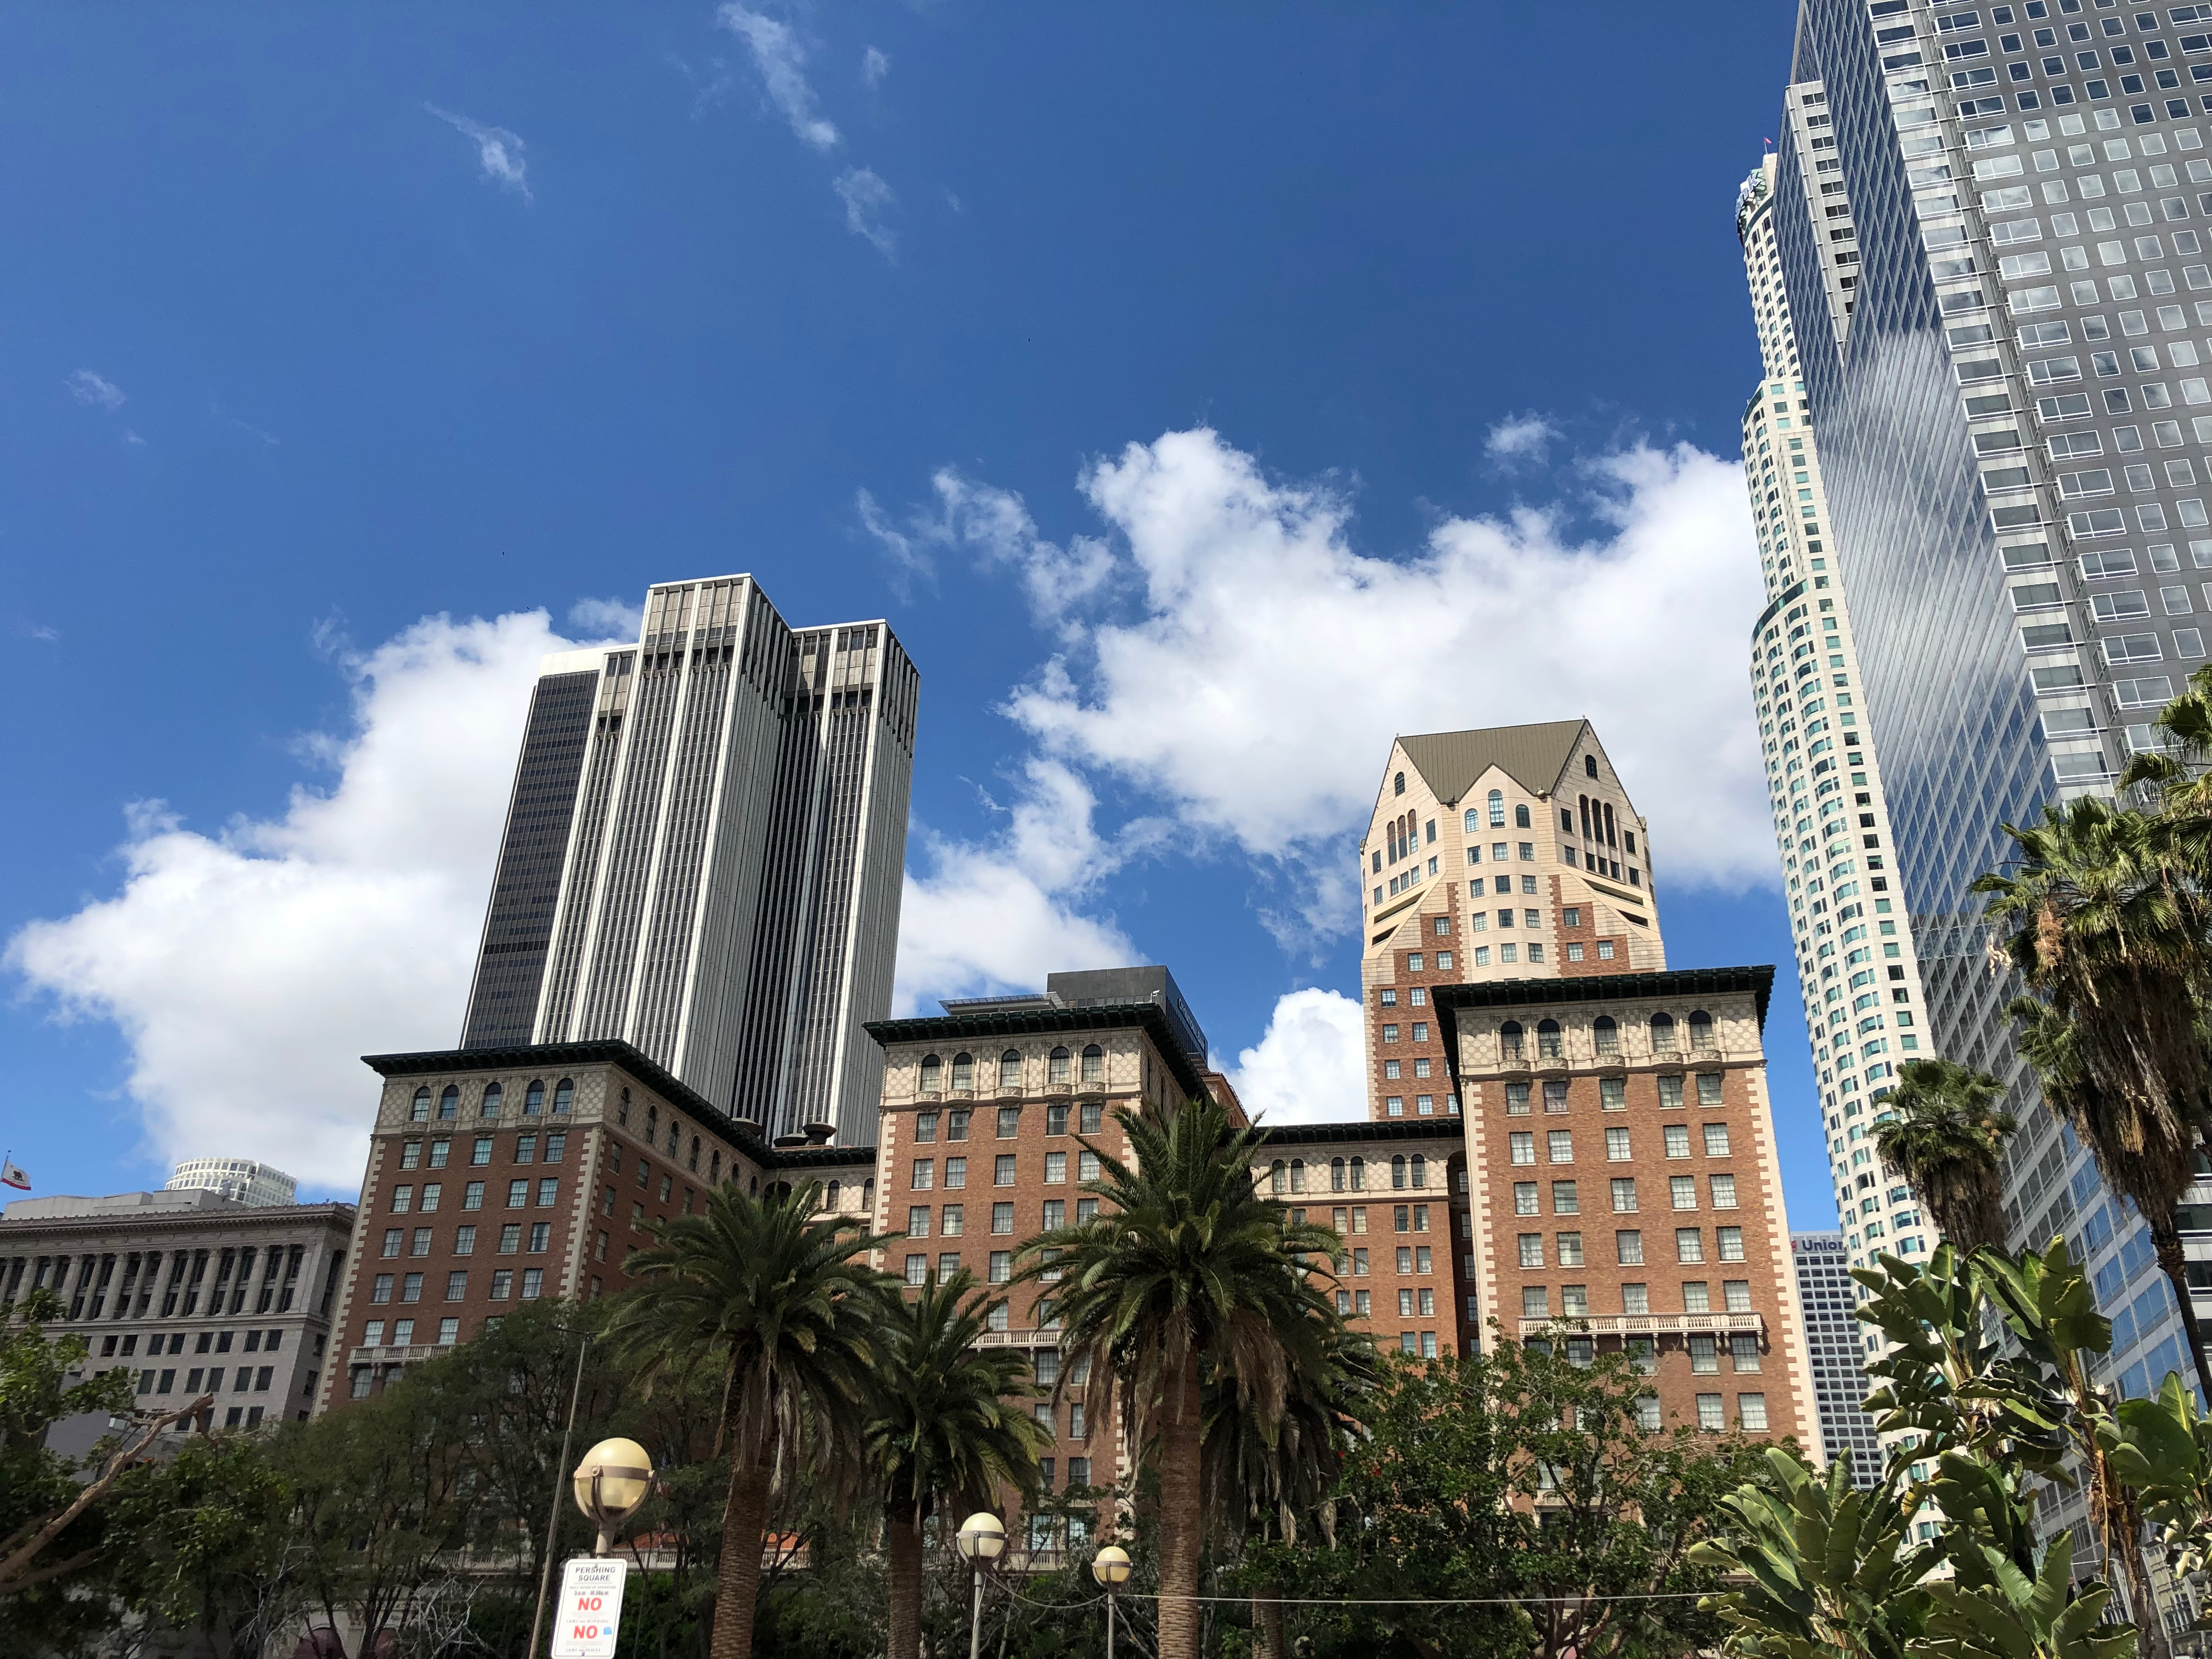 View from Pershing Square